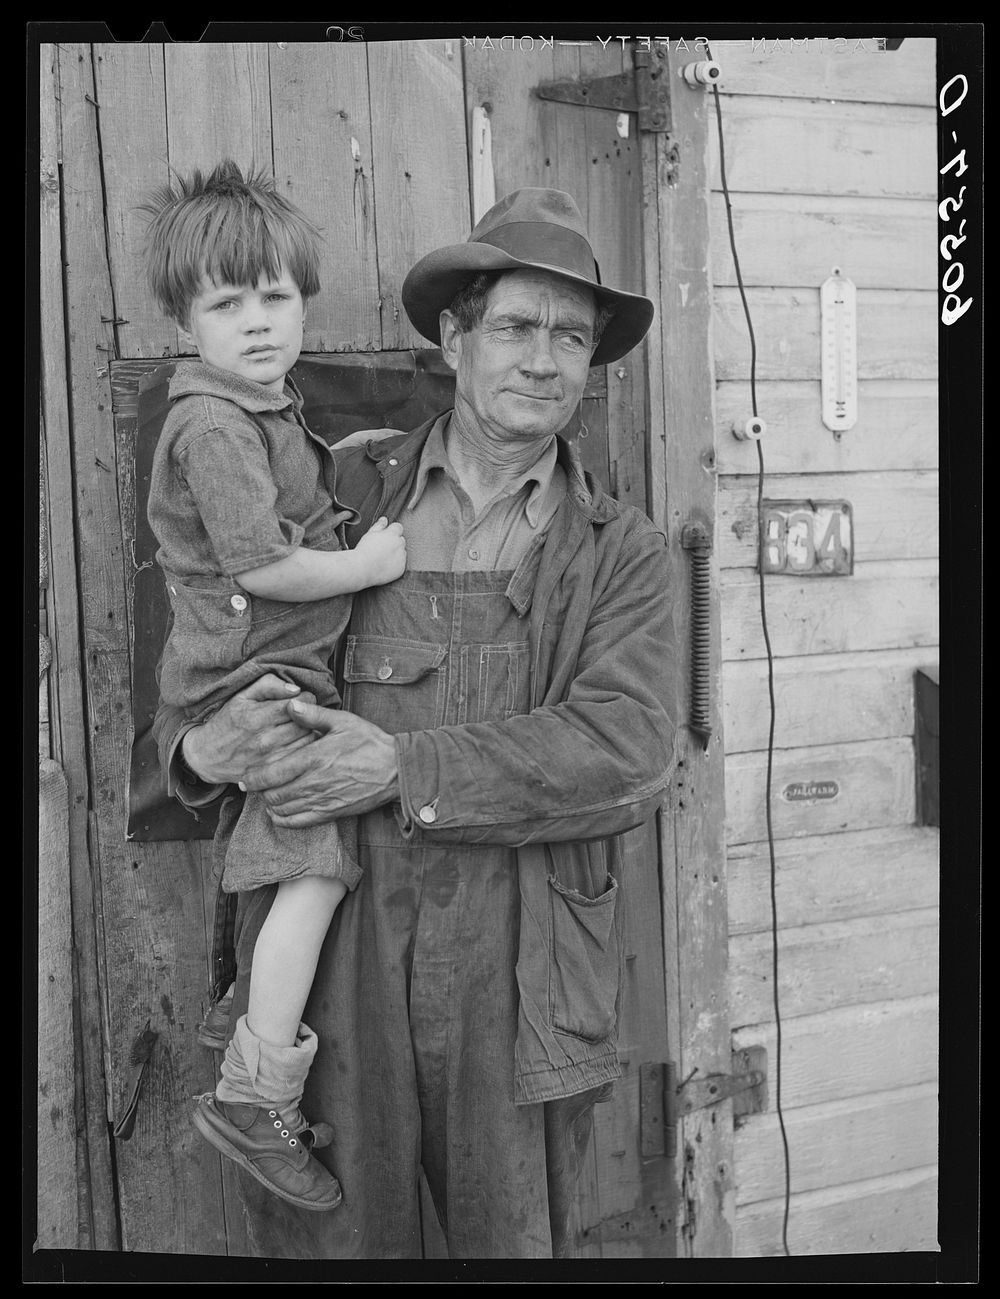 Resident of river bottom's shack town. Dubuque, Iowa. Sourced from the Library of Congress.